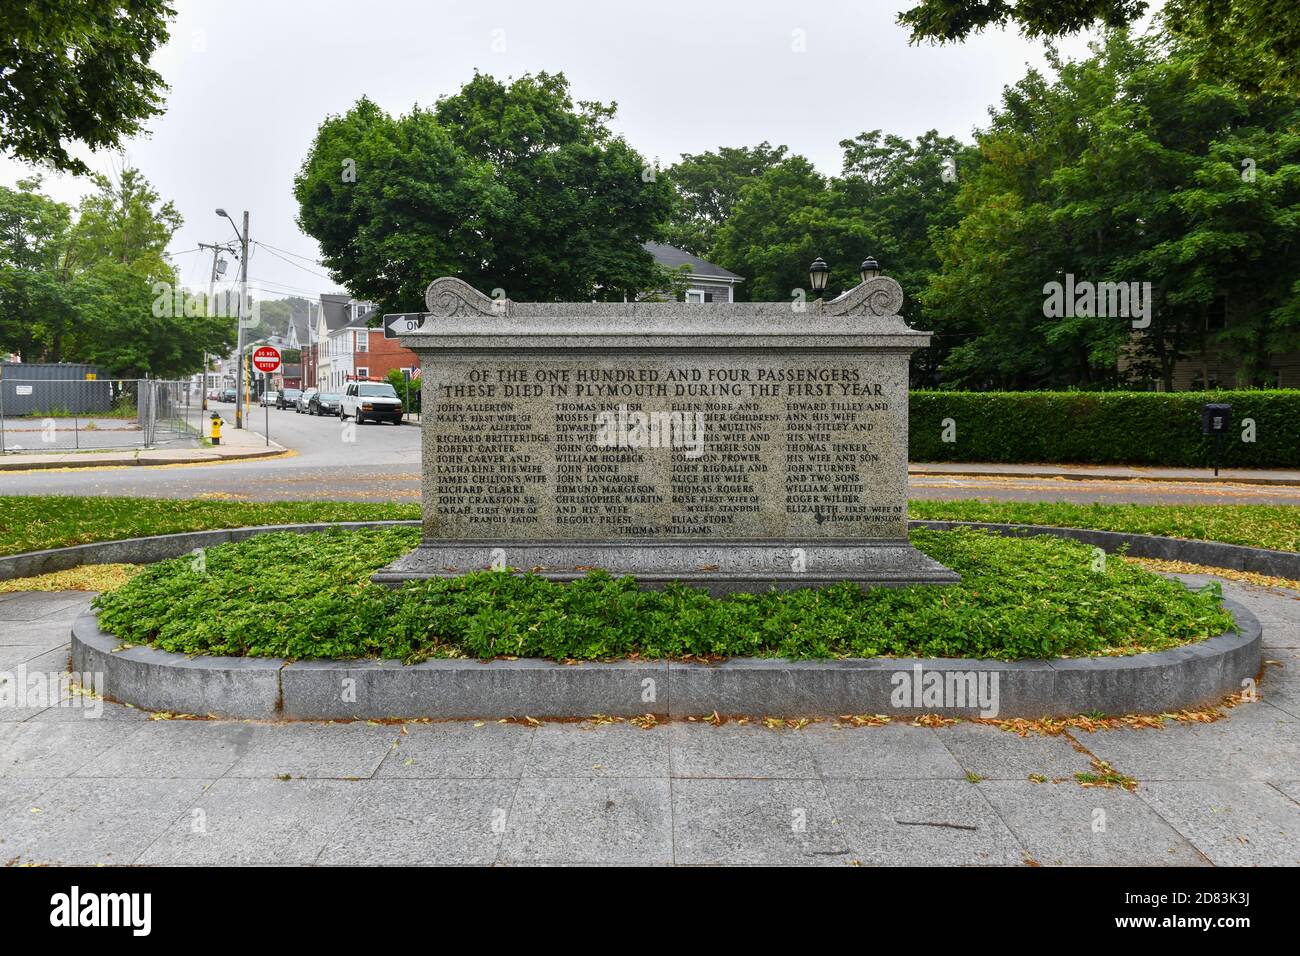 Plymouth, MA - July 3, 2020: Cole's Hill is a National Historic Landmark containing the first cemetery used by the Mayflower Pilgrims in 1620 and acro Stock Photo